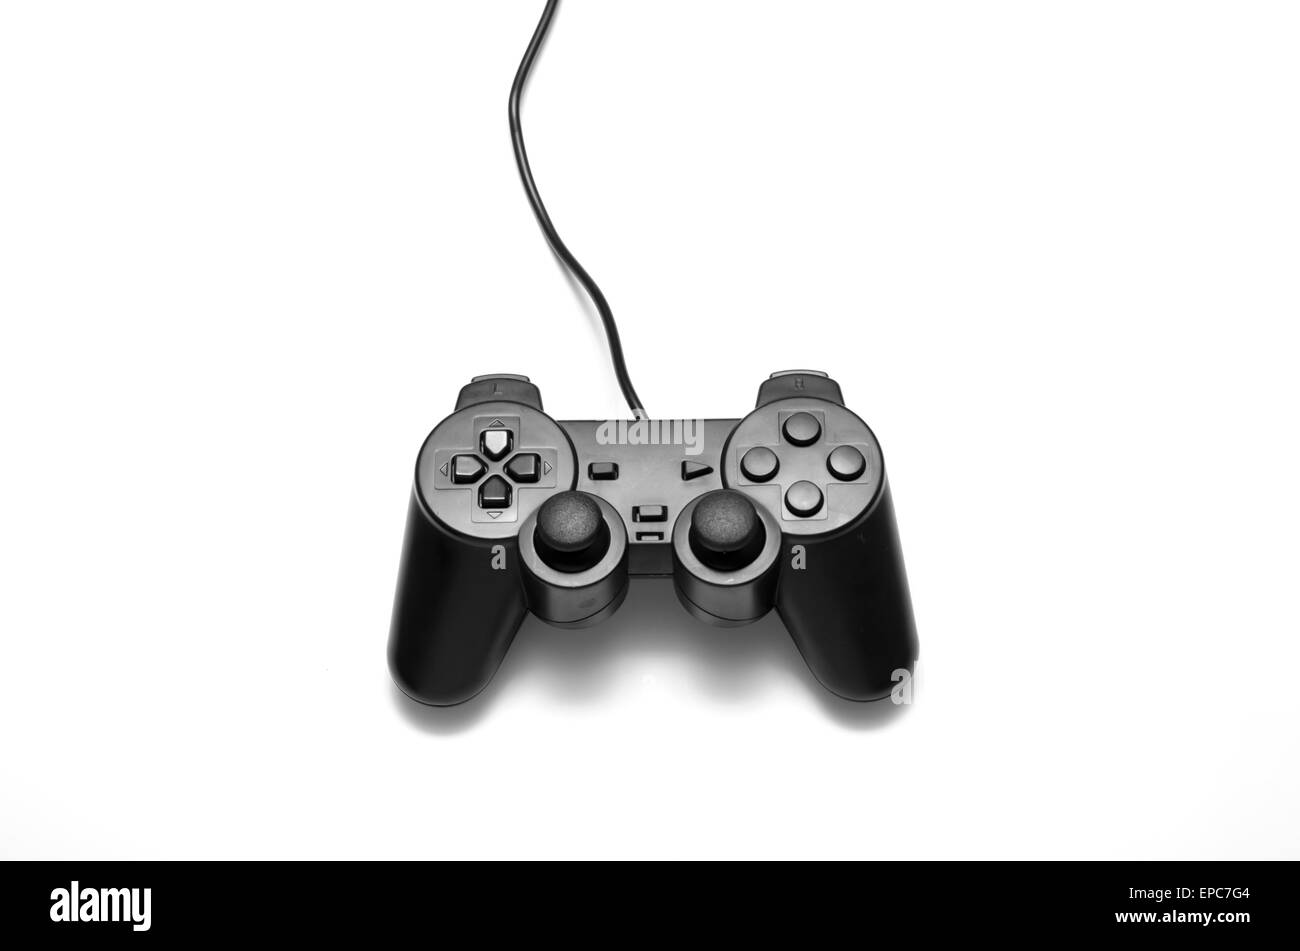 video game controller on a white background Stock Photo